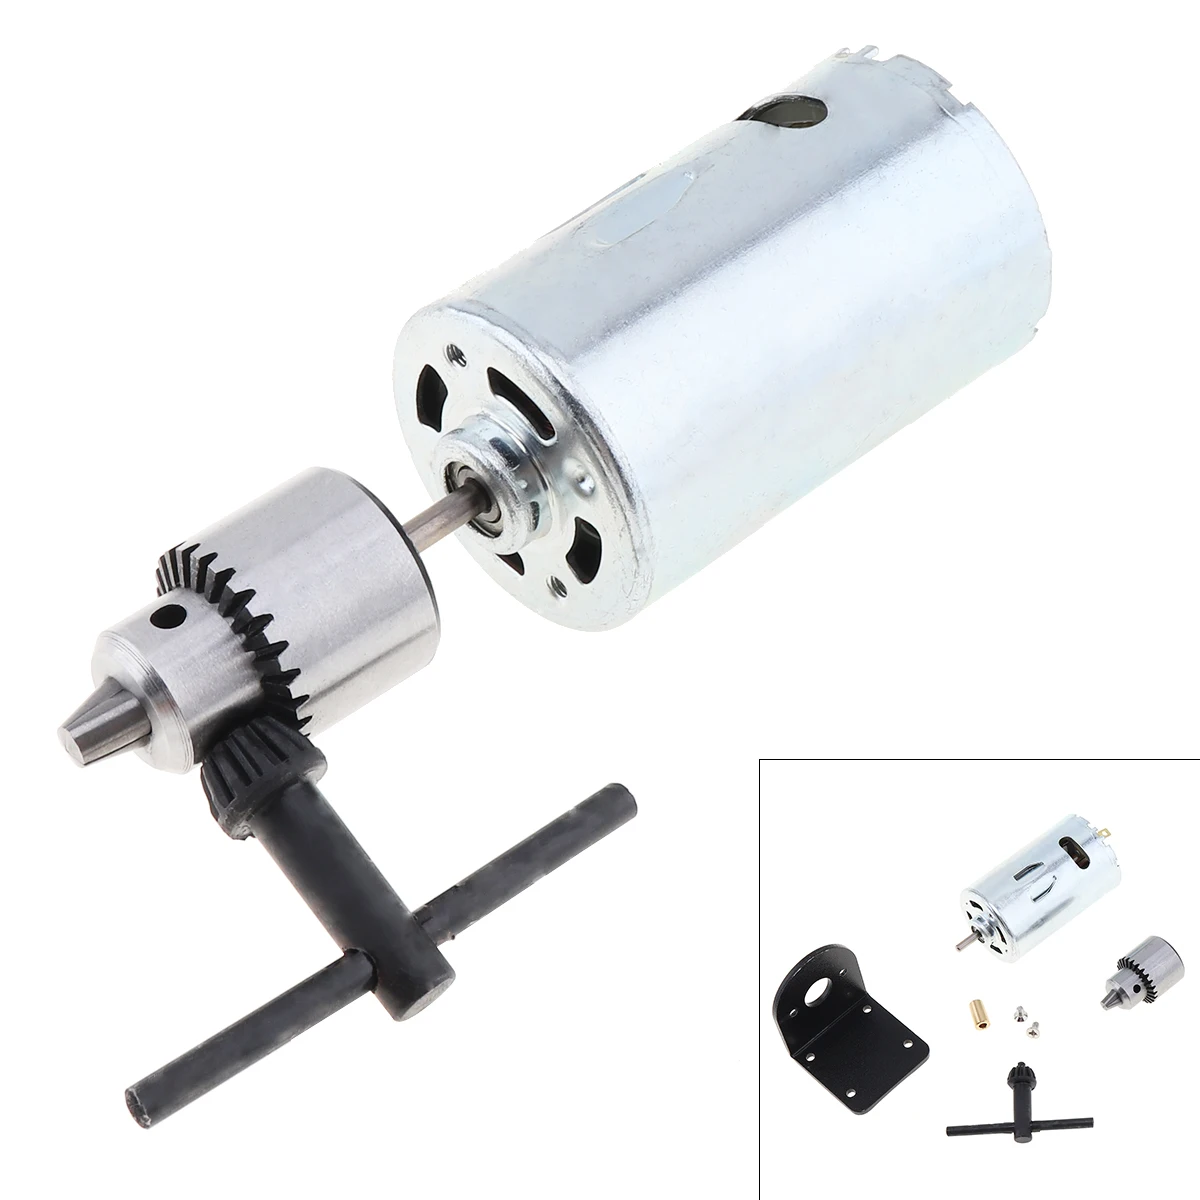 12V-36V Motor Bench Mini Hand Drill with 0.6-6mm B10 Chuck and Mounting Bracket 